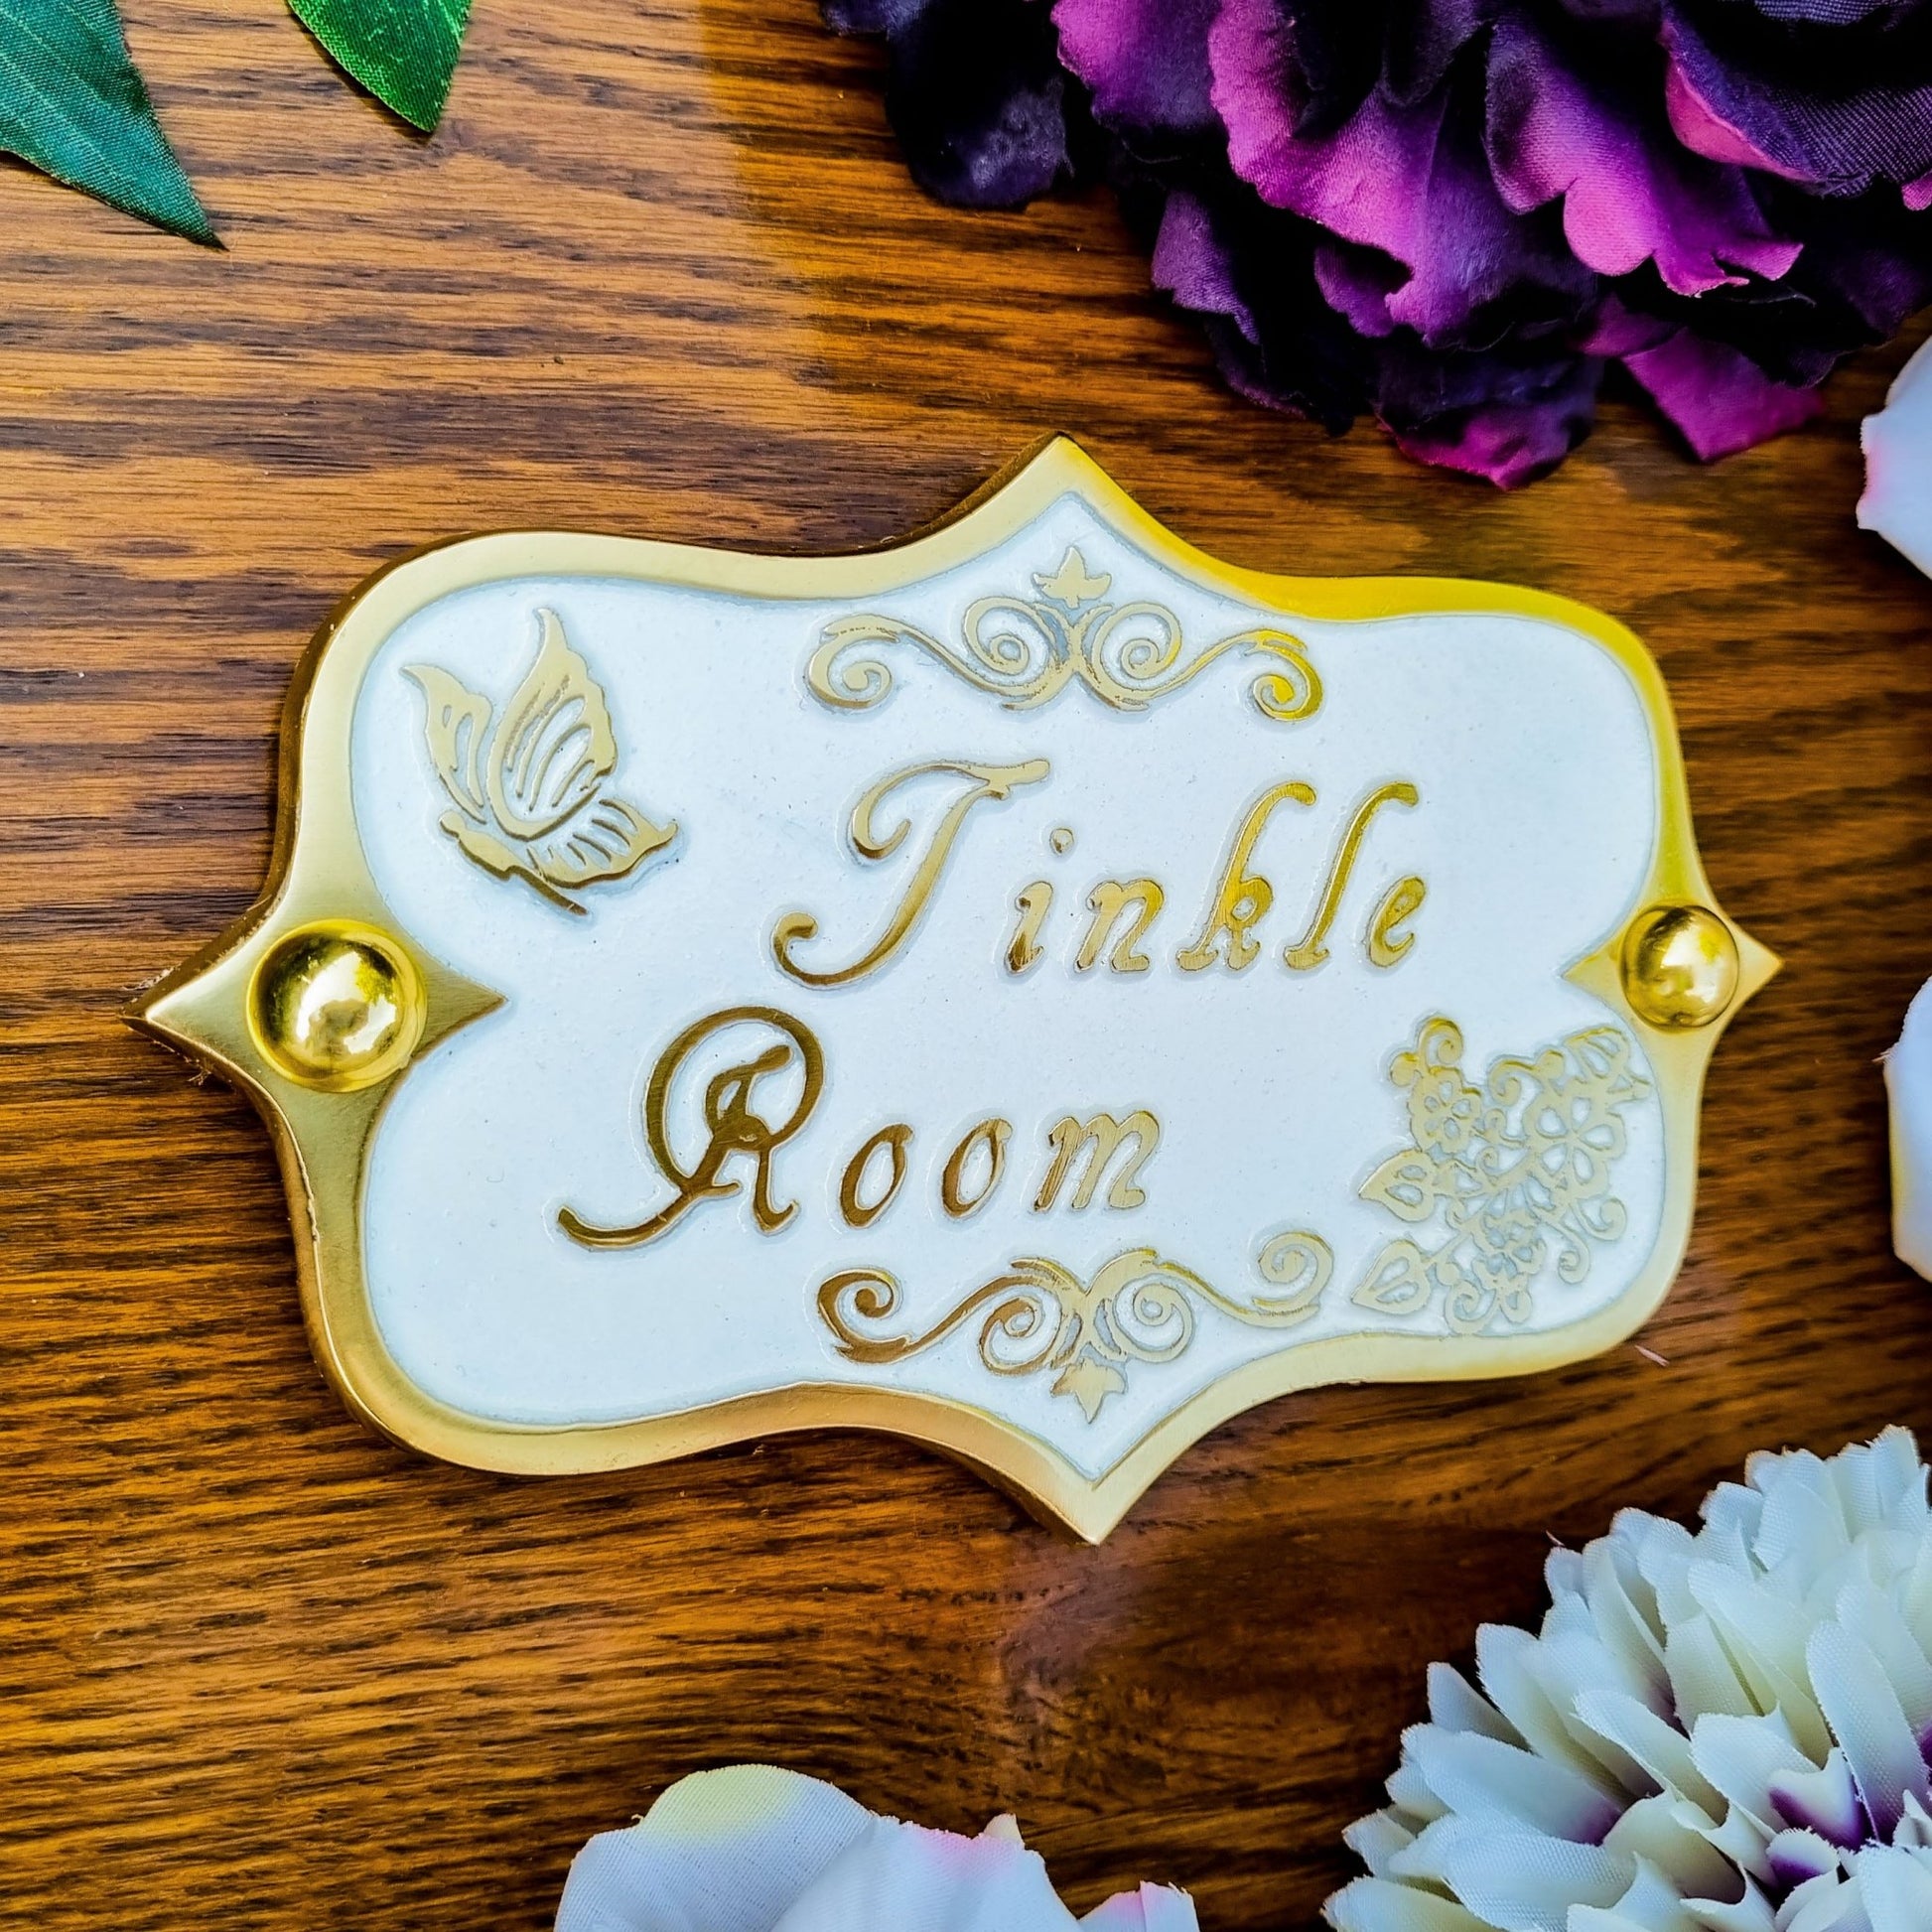 Vintage 'Tinkle Room' Sign - The Metal Foundry